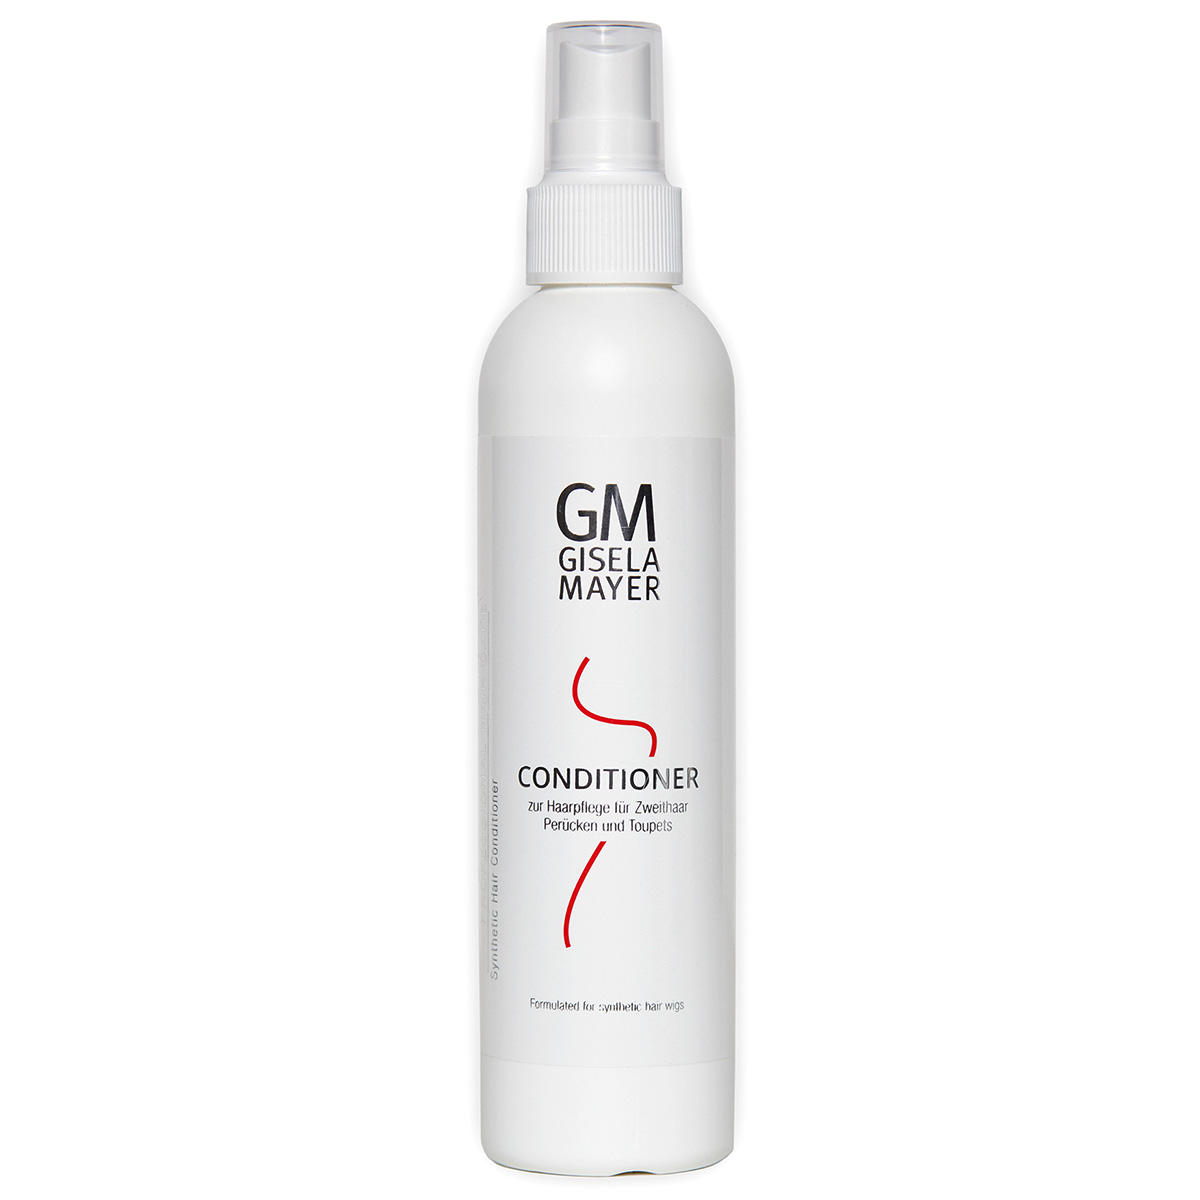 Gisela Mayer Synthetic Hair Conditioner 200 ml - 1